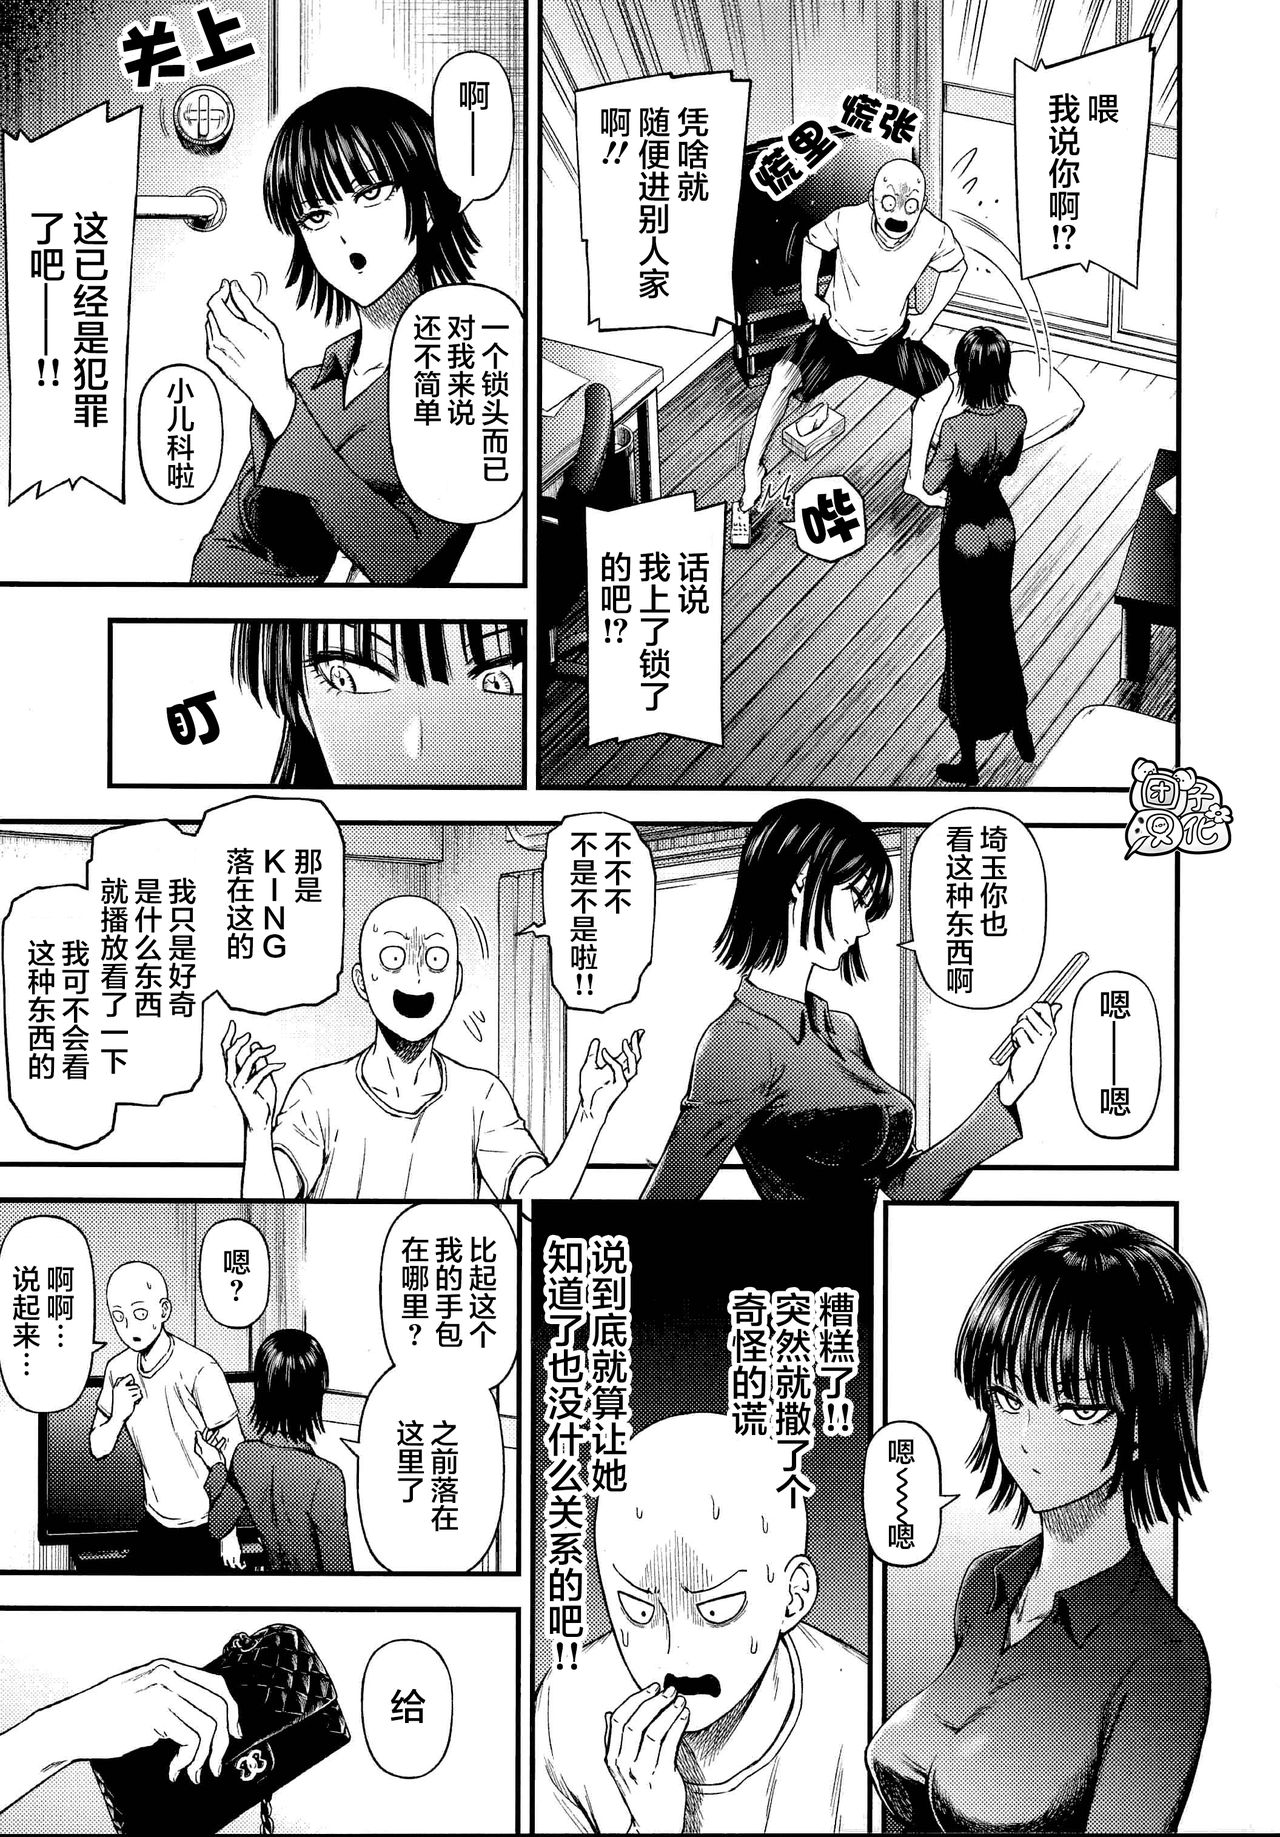 [Kiyosumi Hurricane (Kiyosumi Hurricane)] ONE-HURRICANE (One Punch Man) page 4 full